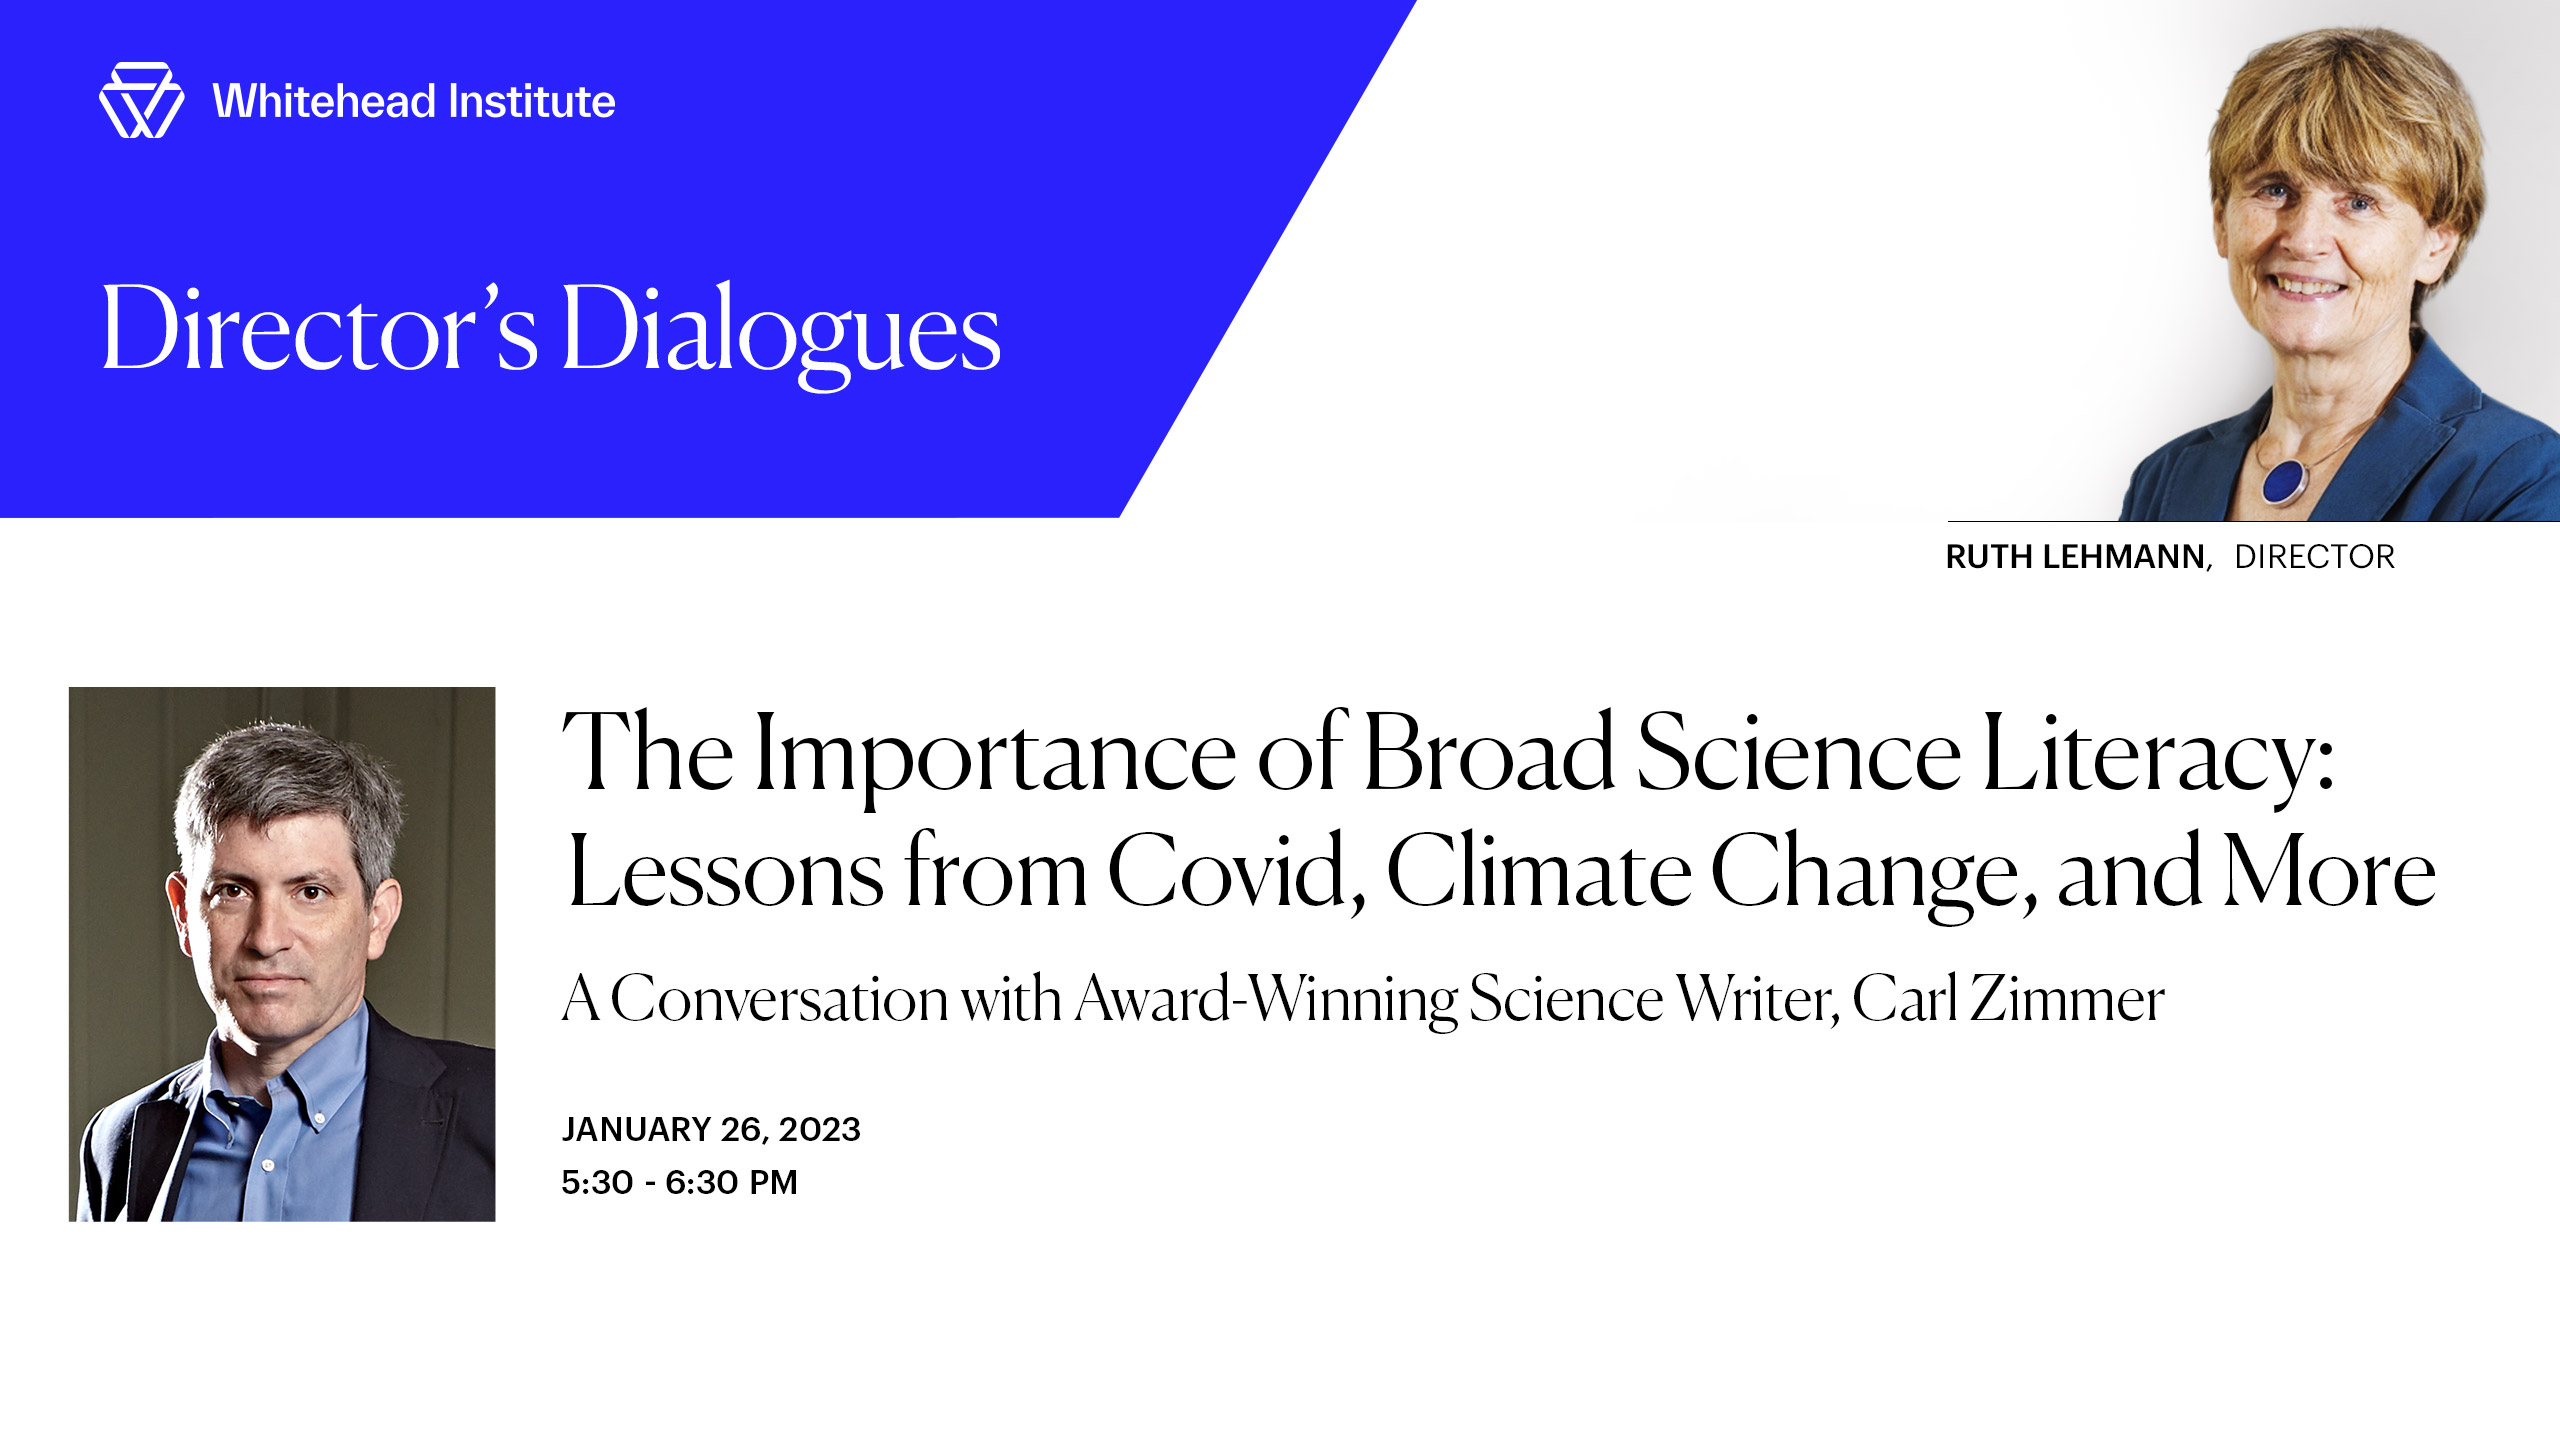 The Importance of Broad Science Literacy: Lessons from Covid, Climate Change, and More